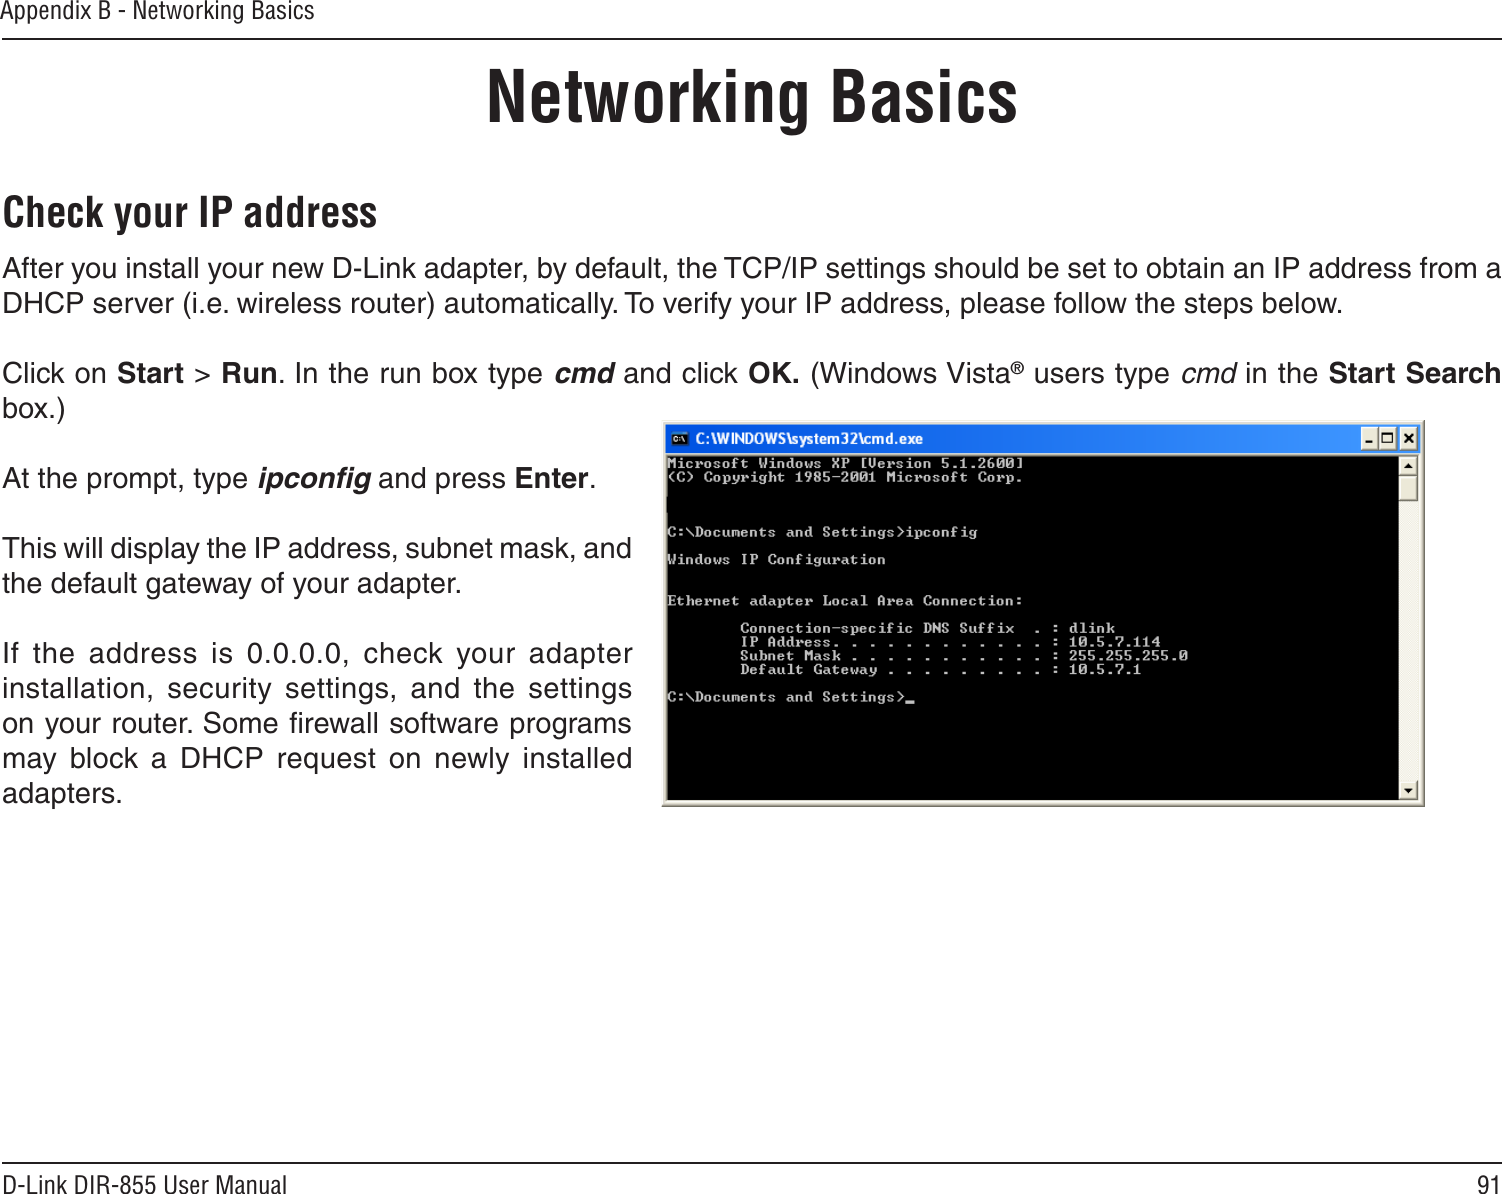 91D-Link DIR-855 User ManualAppendix B - Networking BasicsNetworking BasicsCheck your IP addressAfter you install your new D-Link adapter, by default, the TCP/IP settings should be set to obtain an IP address from a DHCP server (i.e. wireless router) automatically. To verify your IP address, please follow the steps below.Click on Start &gt; Run. In the run box type cmd and click OK. (Windows Vista® users type cmd in the Start Search box.)At the prompt, type ipconﬁg and press Enter.This will display the IP address, subnet mask, and the default gateway of your adapter.If  the  address  is  0.0.0.0,  check  your  adapter installation,  security  settings,  and  the  settings on your router. Some ﬁrewall software programs may  block  a  DHCP  request  on  newly  installed adapters. 